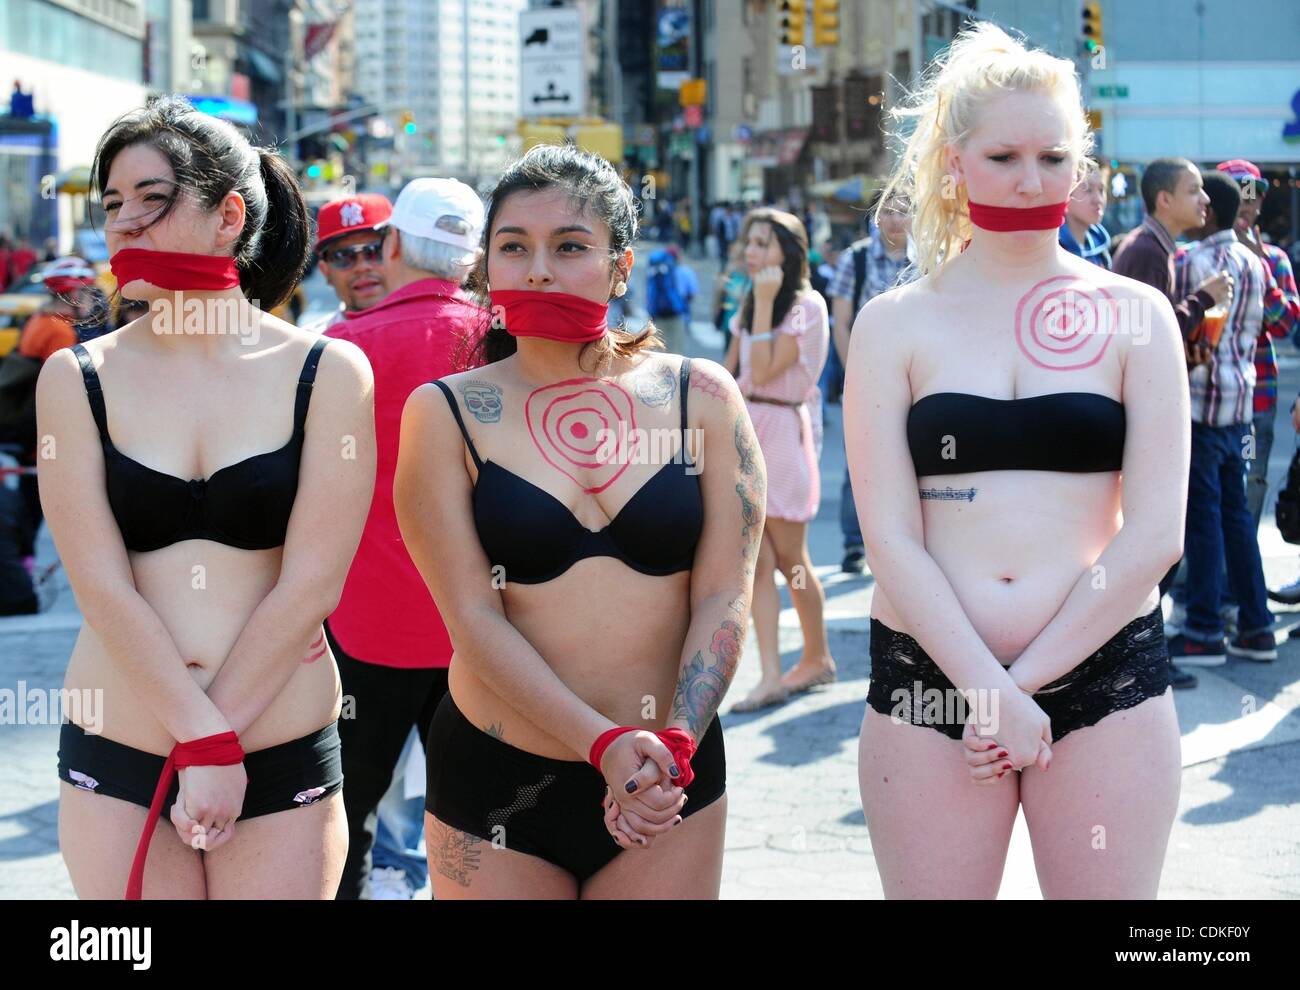 Mar. 18, 2011 - Manhattan, New York, U.S. - Female sex worker advocates  stand silently gagged and bound in Union Square to raise awareness of  United Nation's recommendation #86* which condemns violence